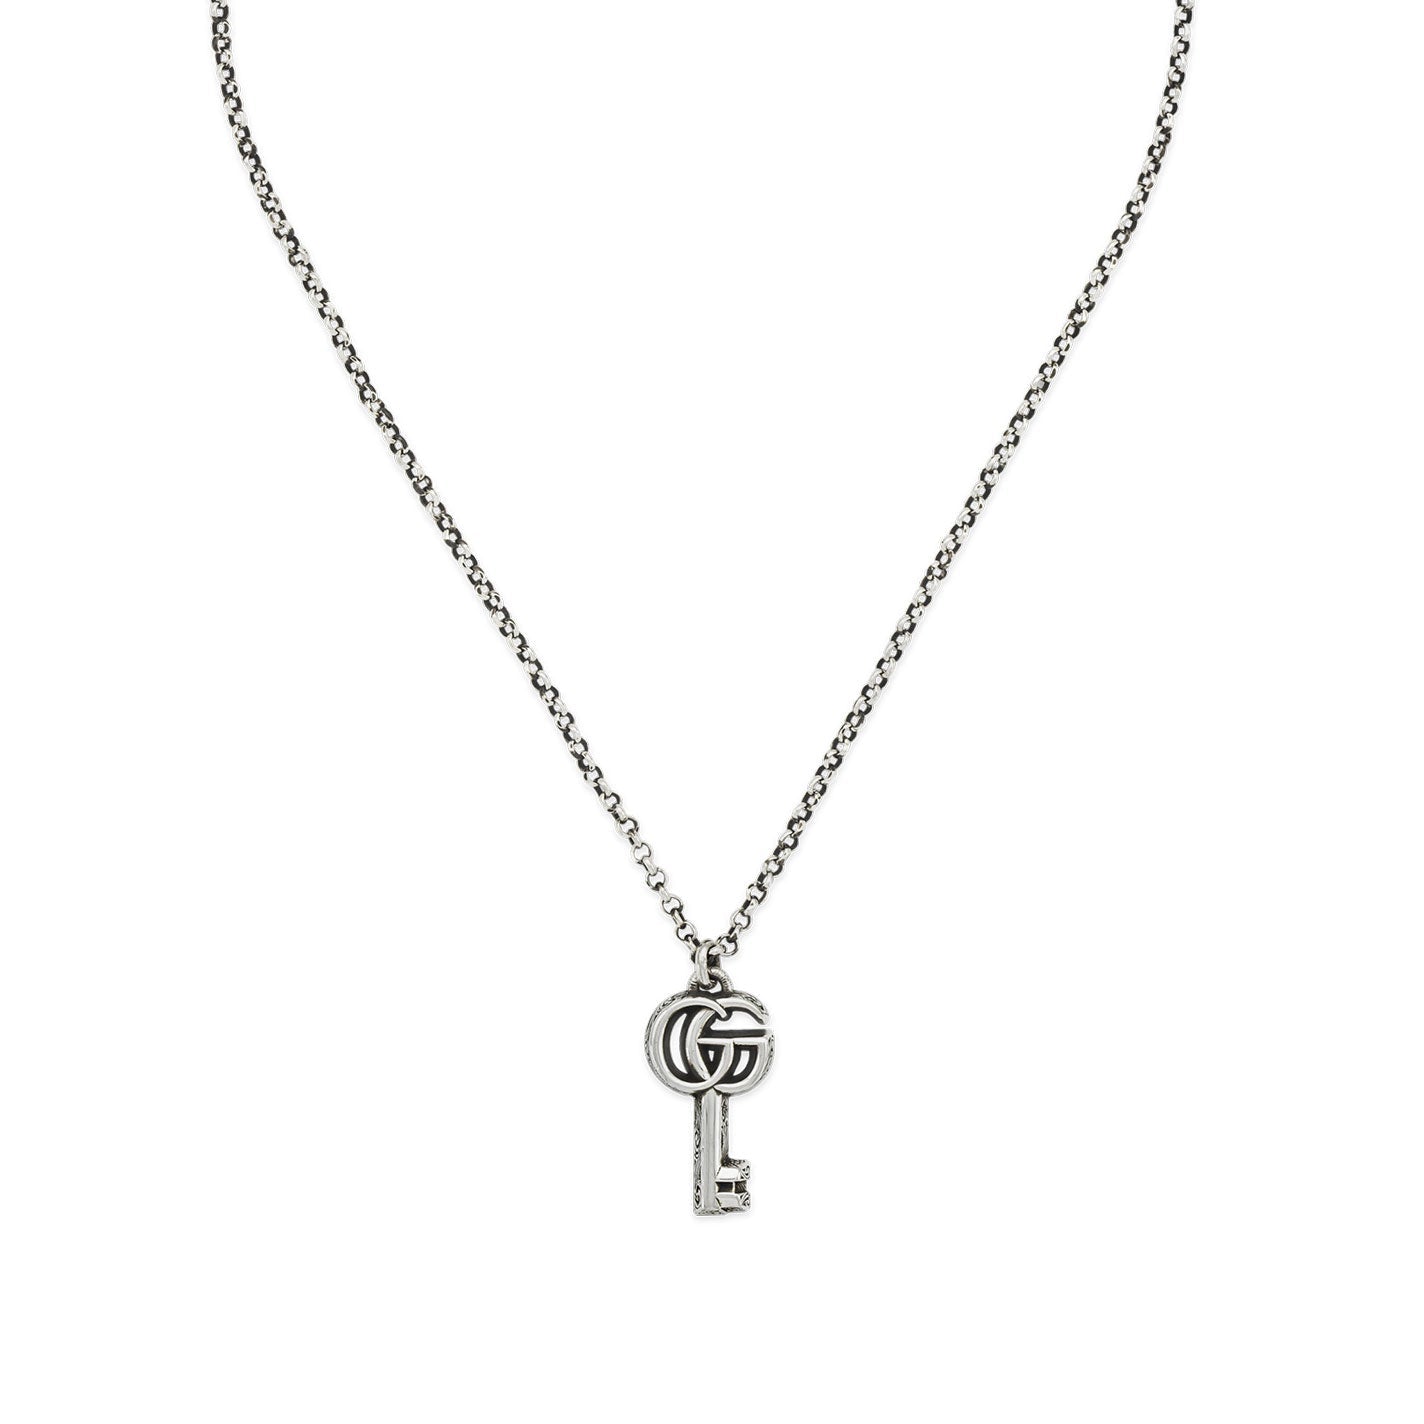 Gucci Double G Key Sterling Silver Necklace Pendant